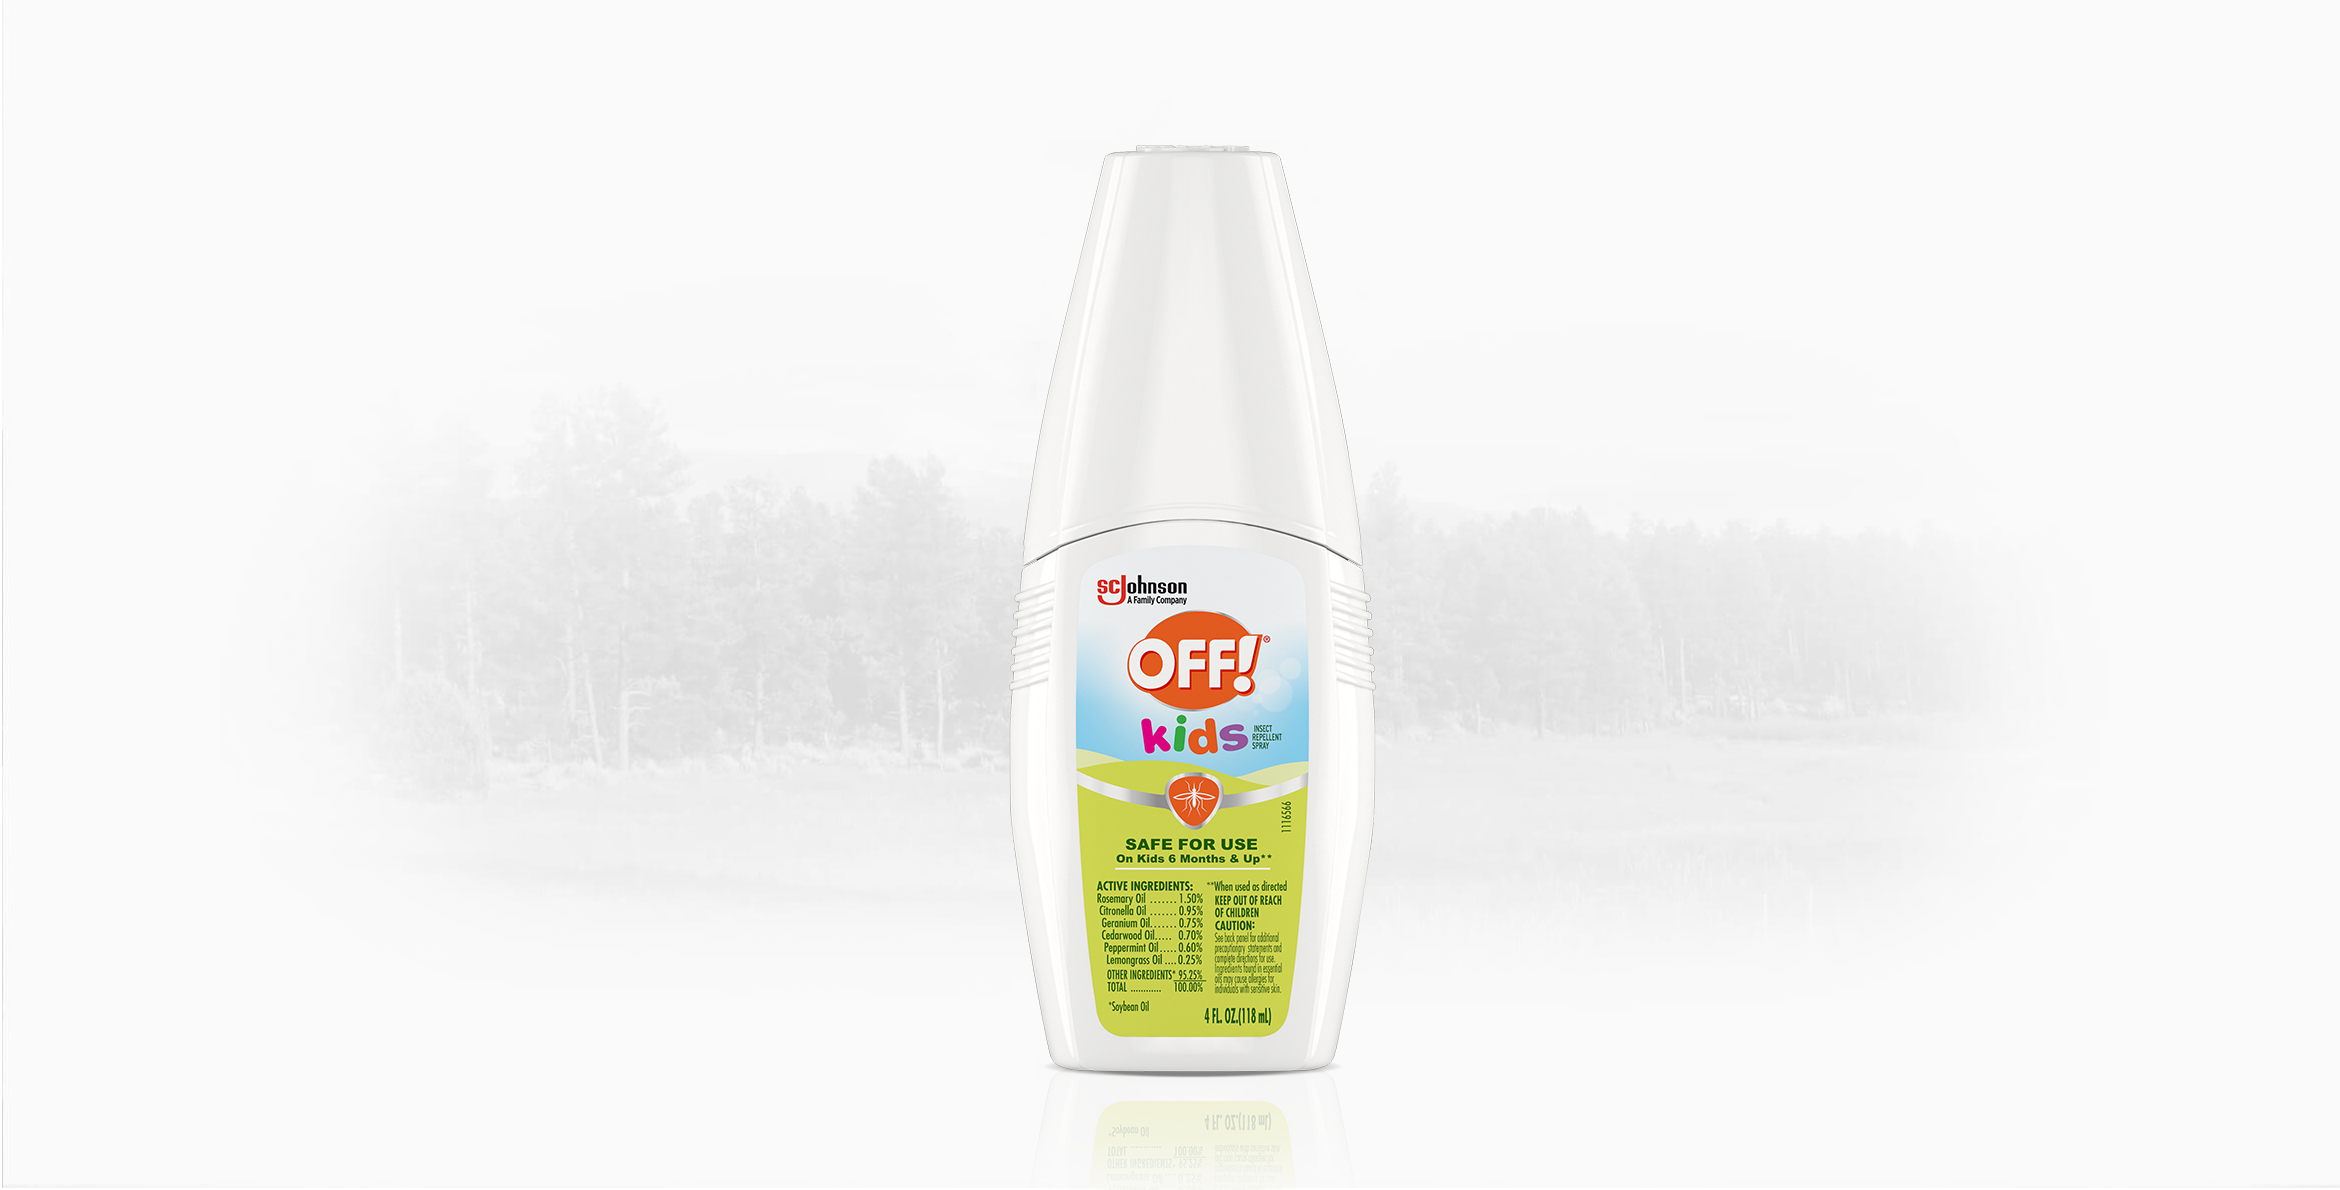 OFF! ® Kids Insect Repellent Spray